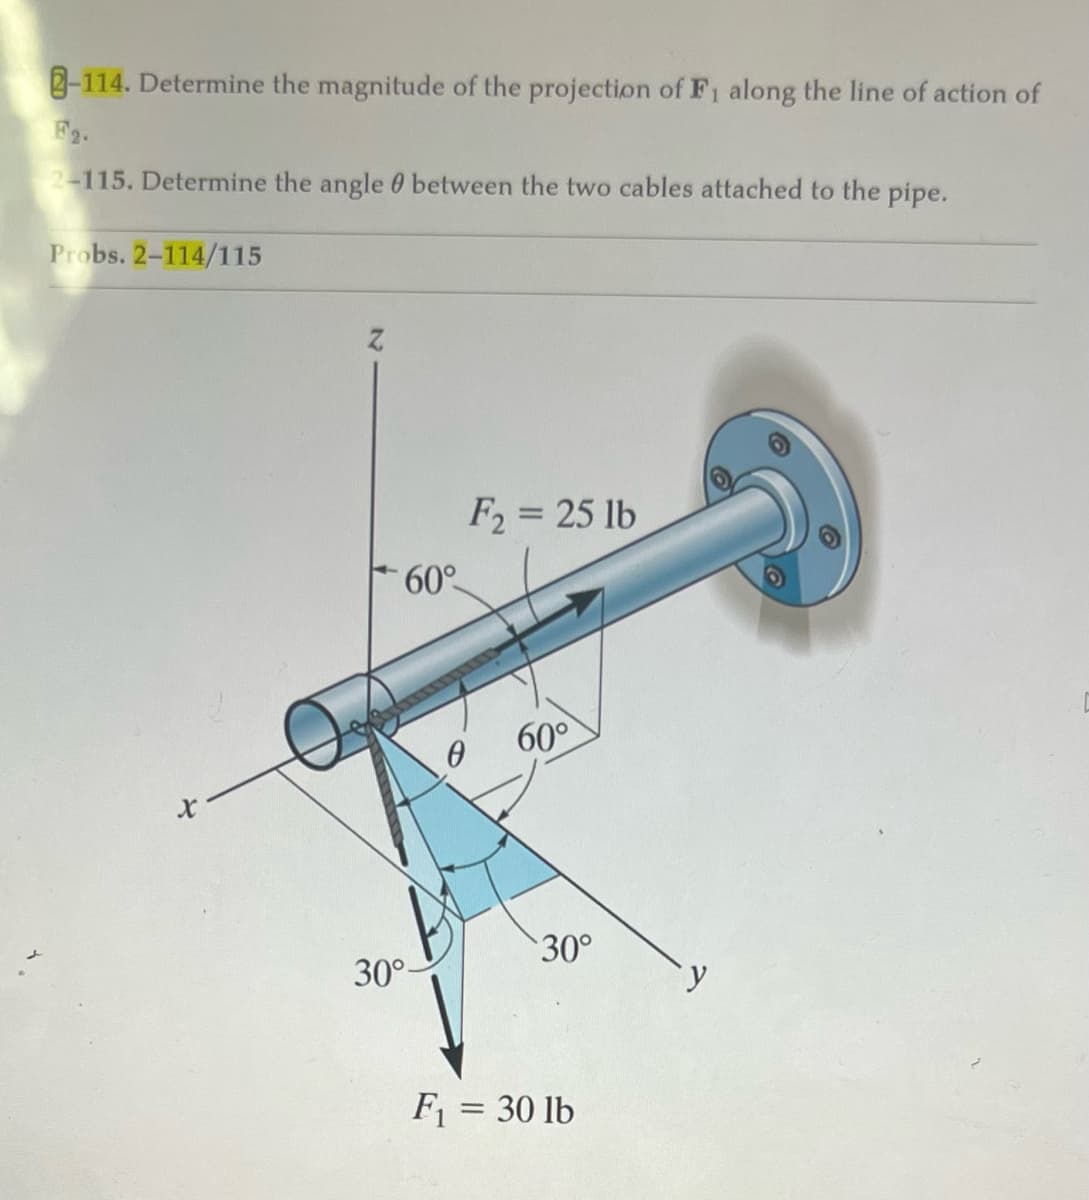 -114. Determine the magnitude of the projection of F₁ along the line of action of
F2.
2-115. Determine the angle between the two cables attached to the pipe.
Probs. 2-114/115
X
60°
30°-
F2= 25 lb
0
60°
30°
F₁ = 30 lb
y